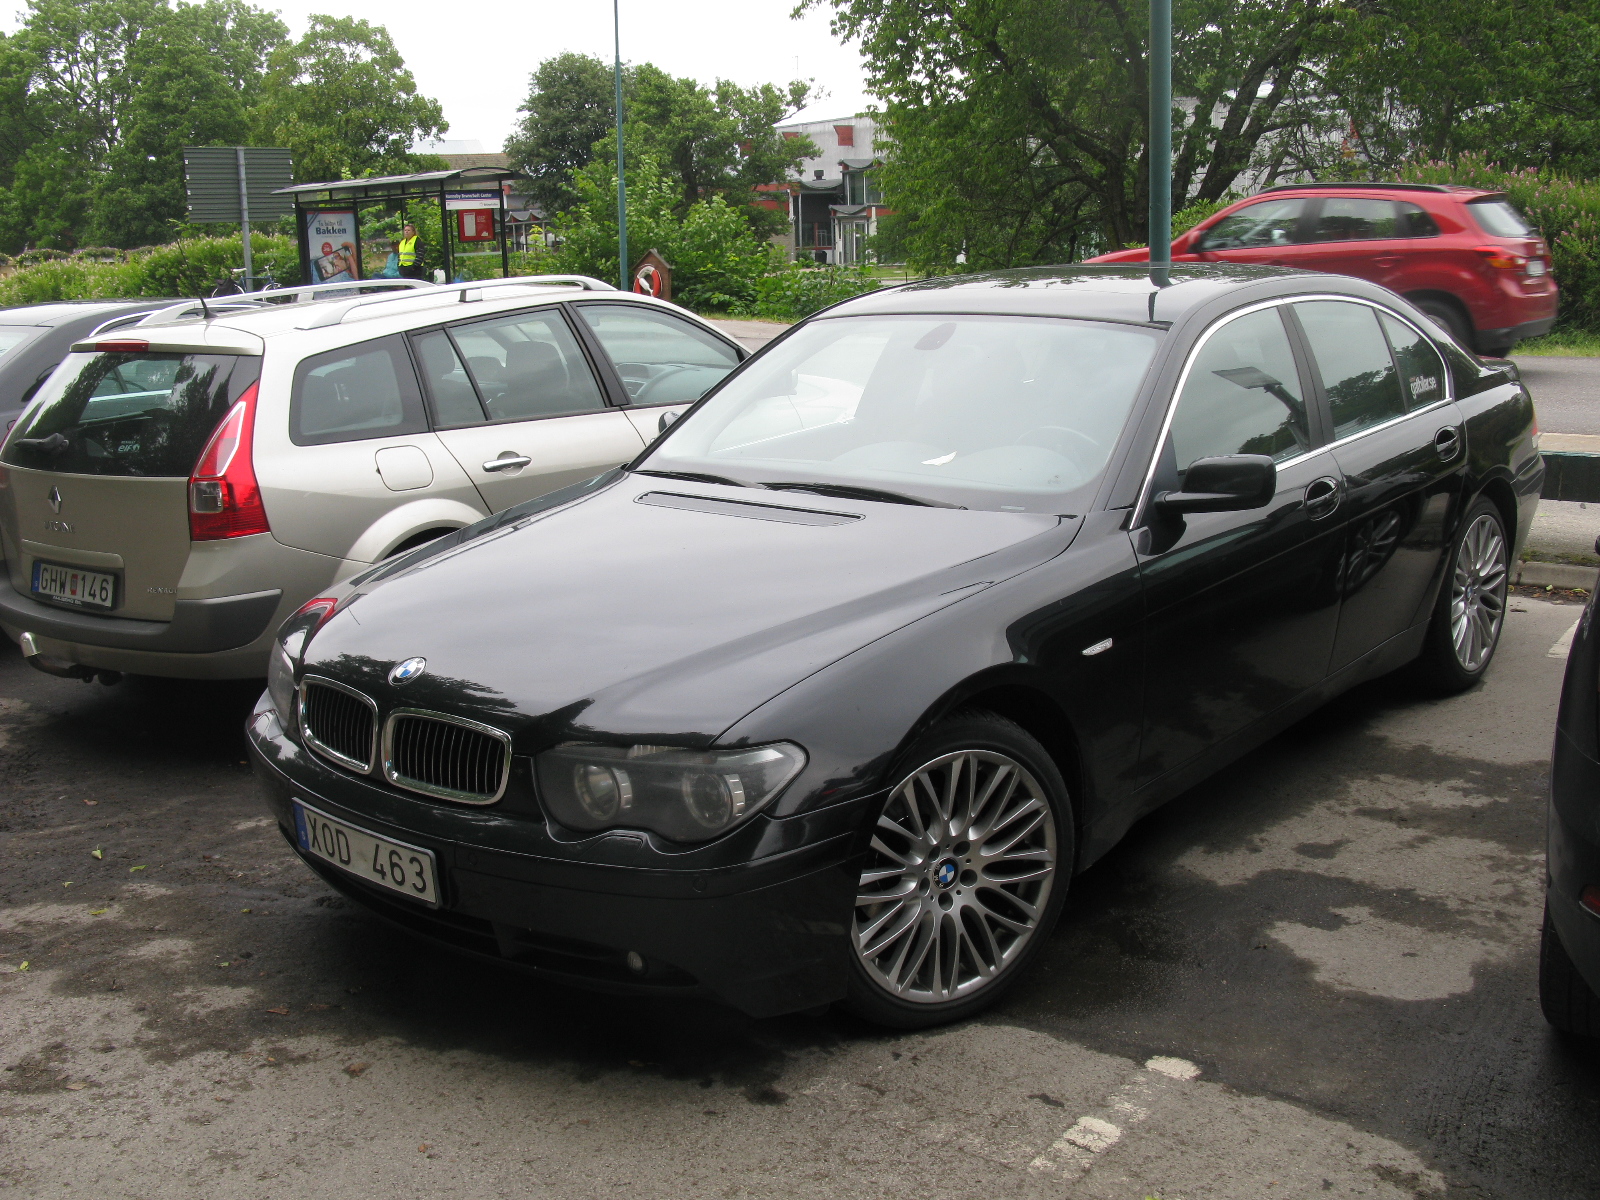 a bmw in a parking space is shown